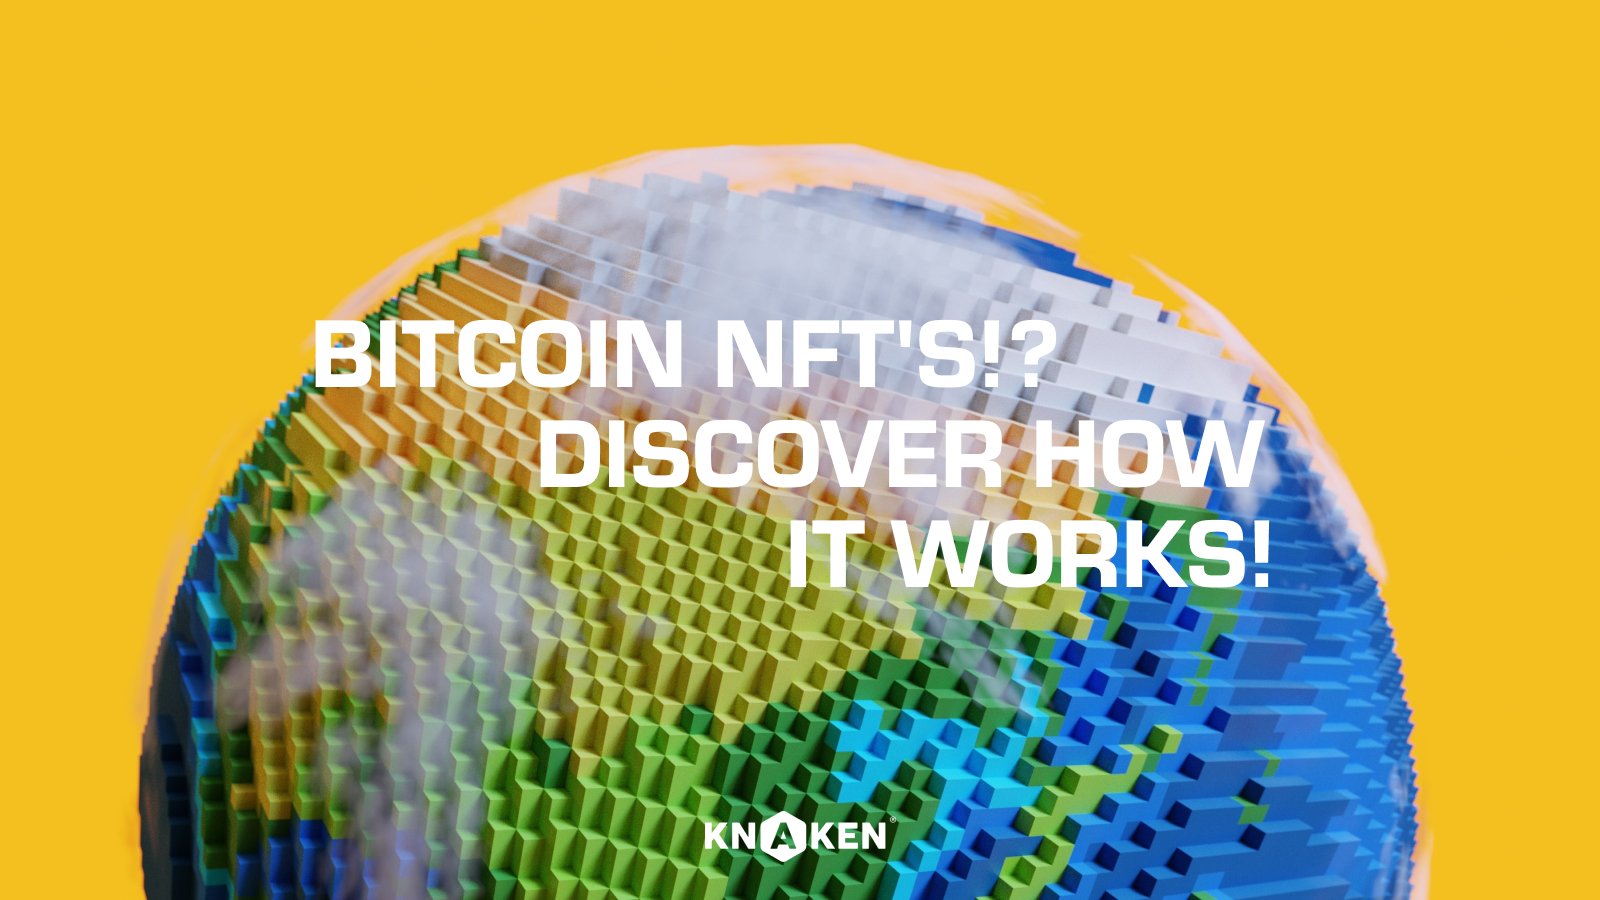 NFTs on Bitcoin? Learn here how that works!